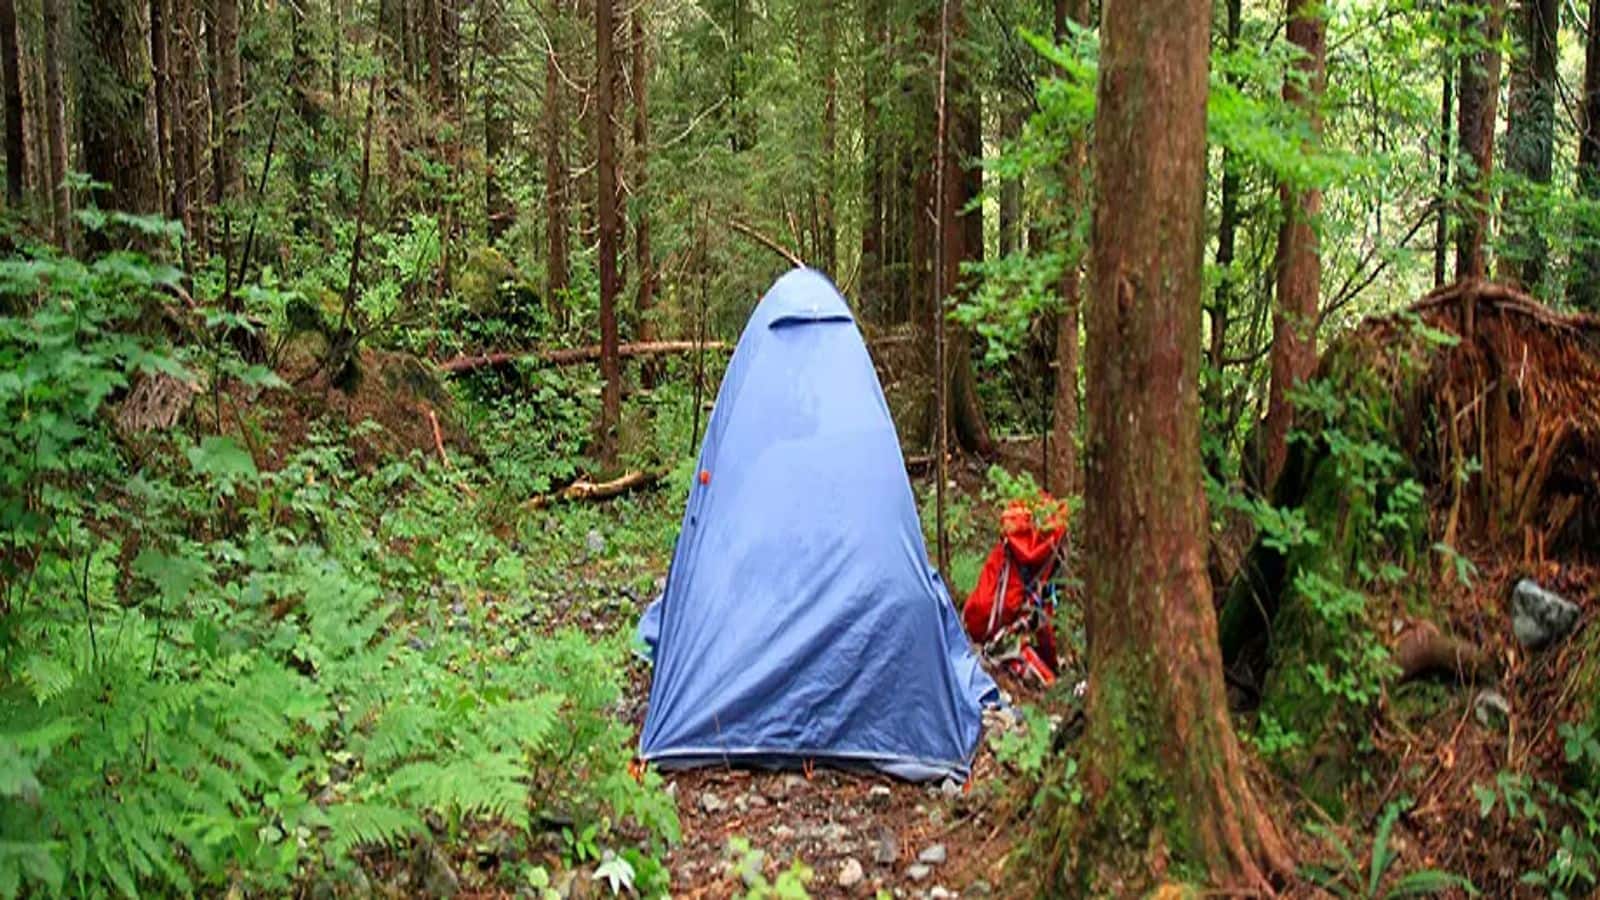 Vancouver rainforest camping essentials for a safe experience